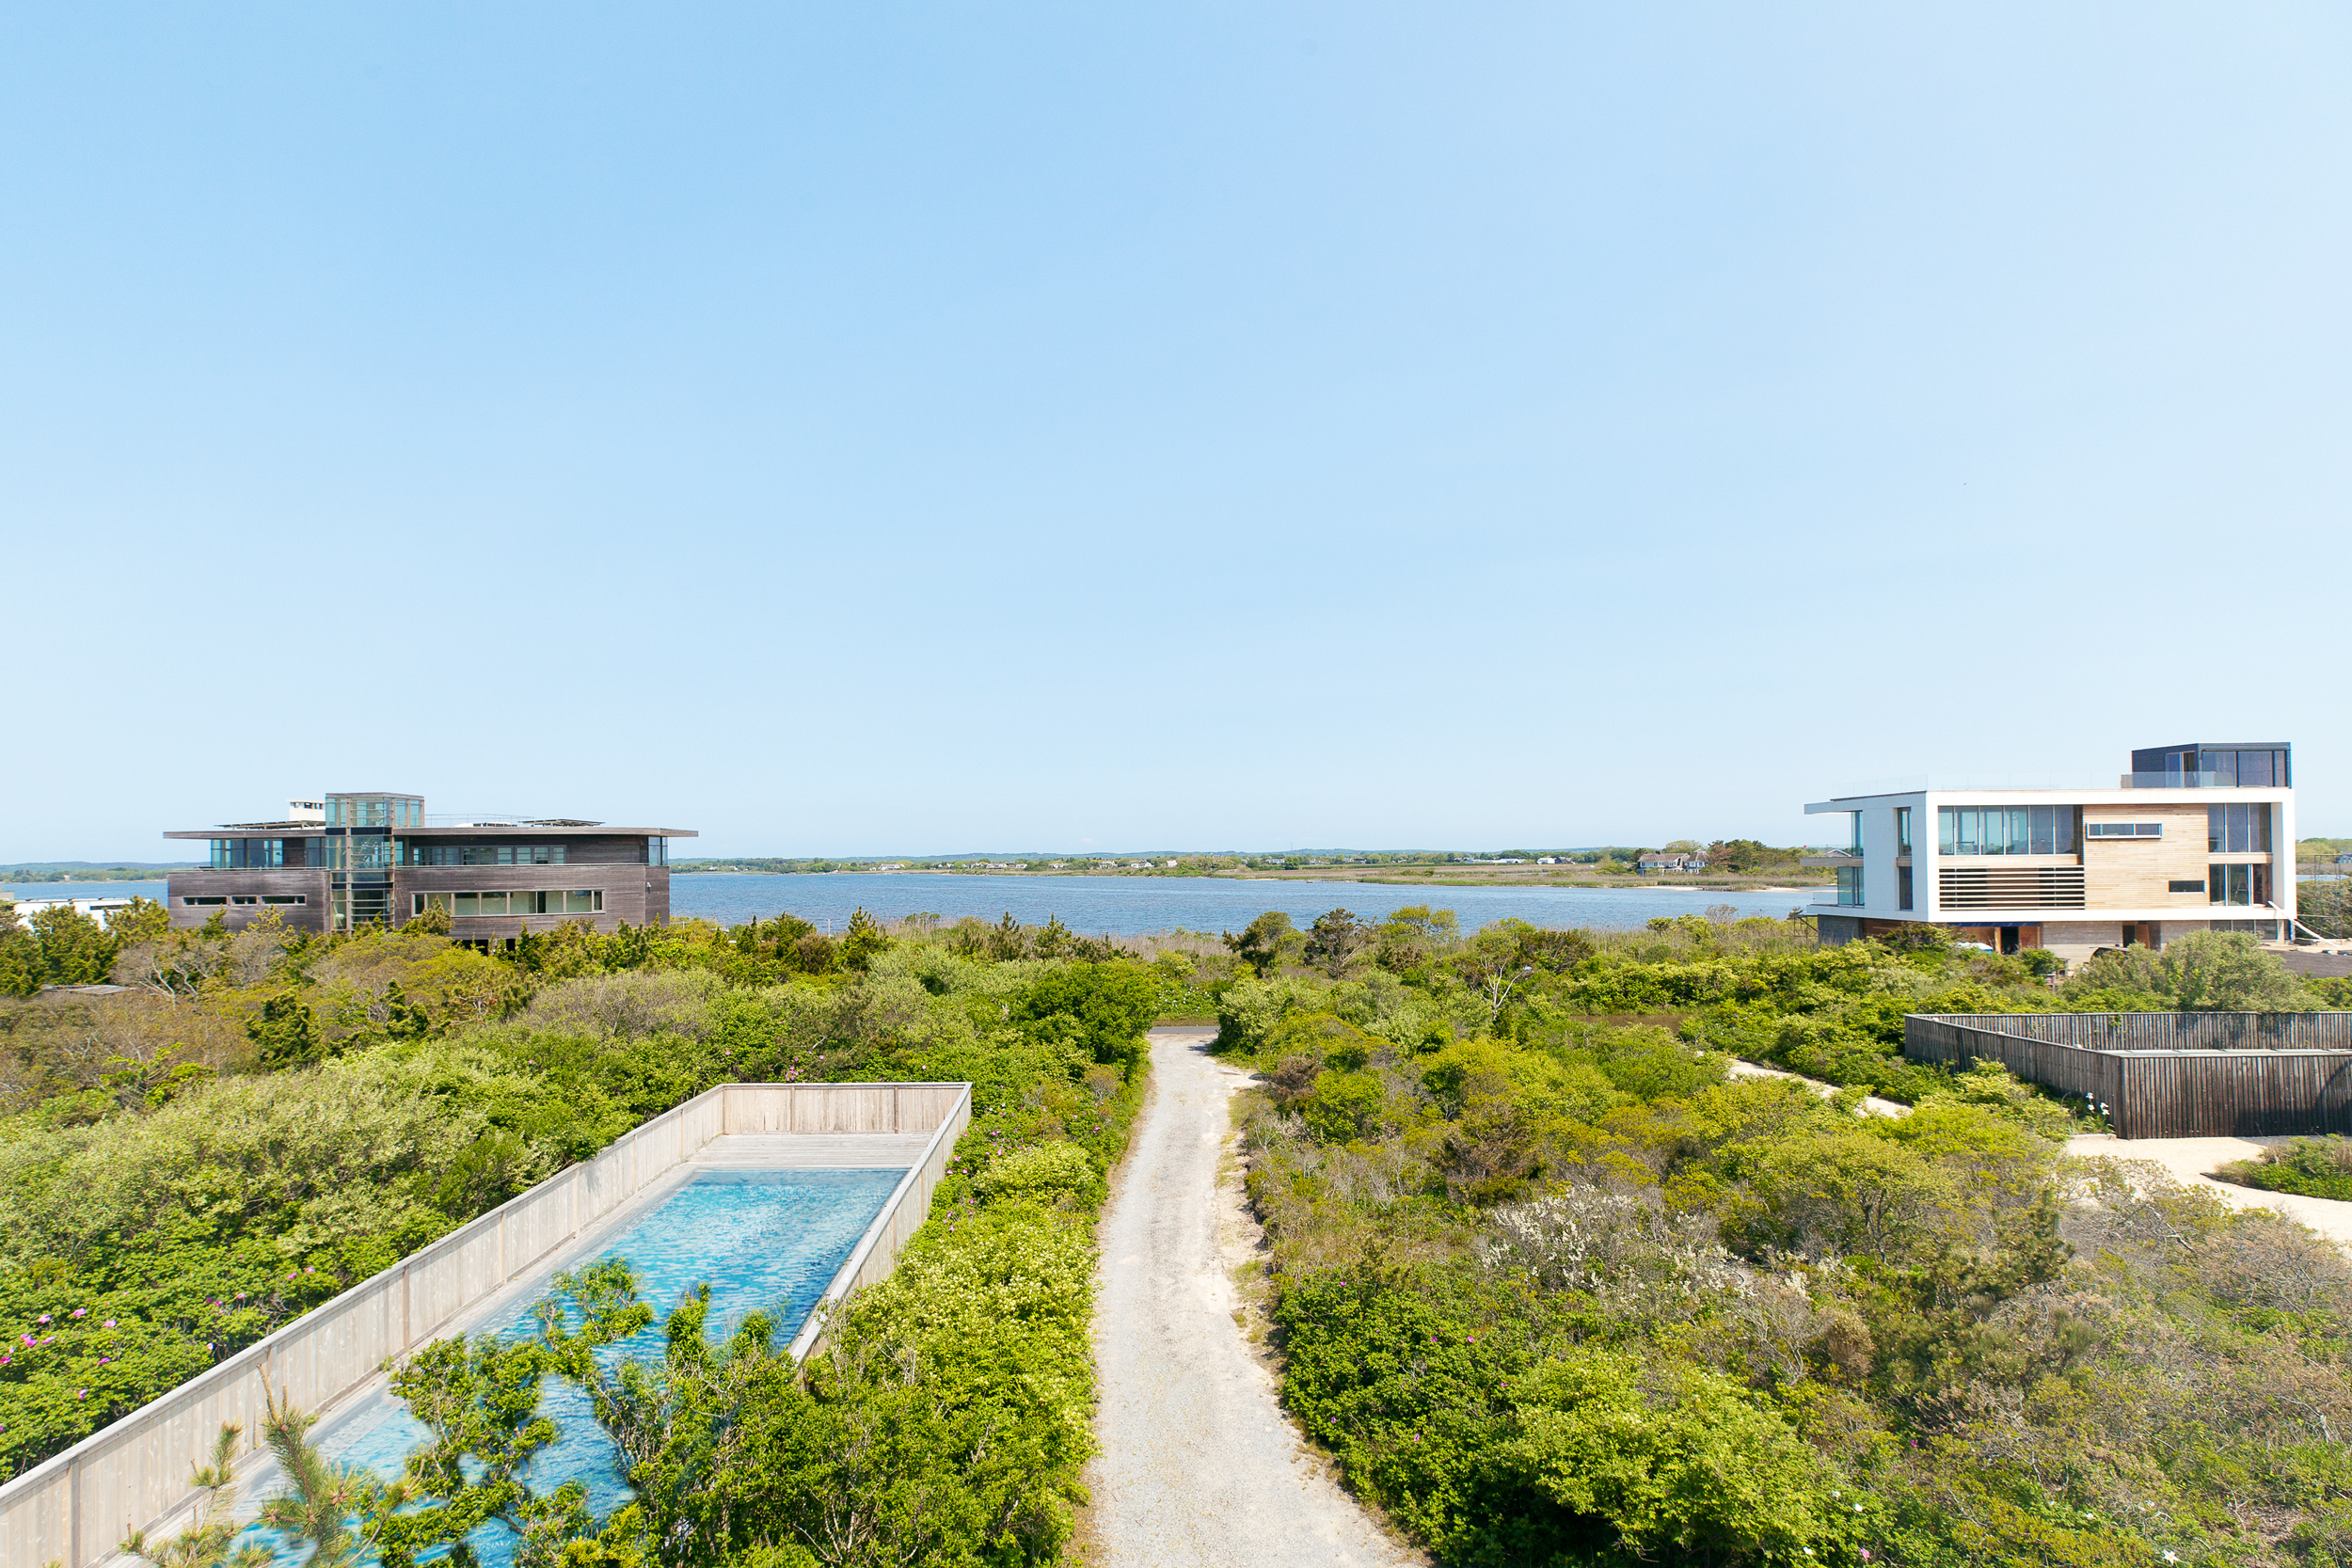 139 Dune Road, Water Mill. JAIME LOPEZ FOR SOTHEBY'S INTERNATIONAL REALTY